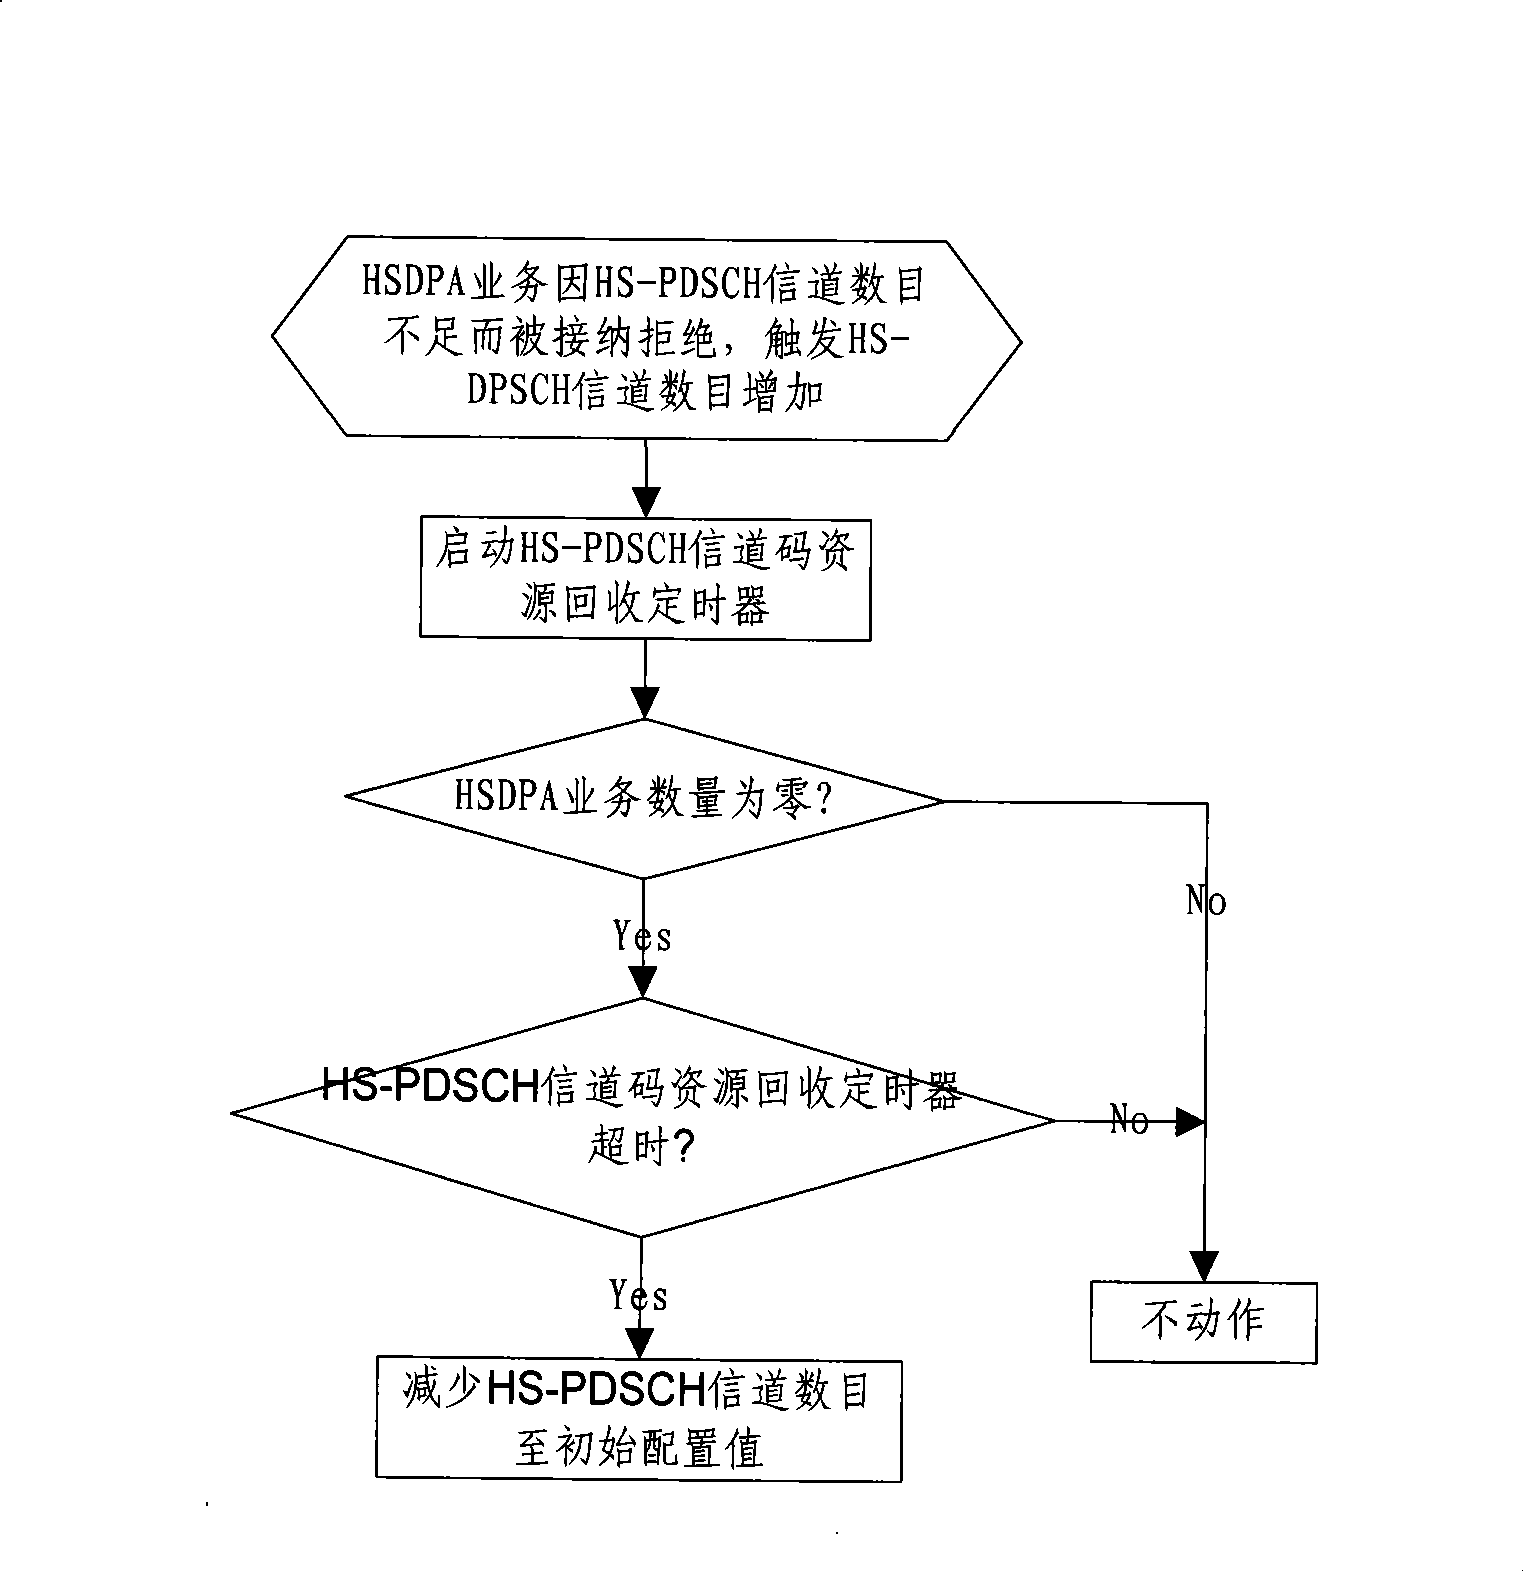 Code resource regulating method for high-speed physical downlink shared channel